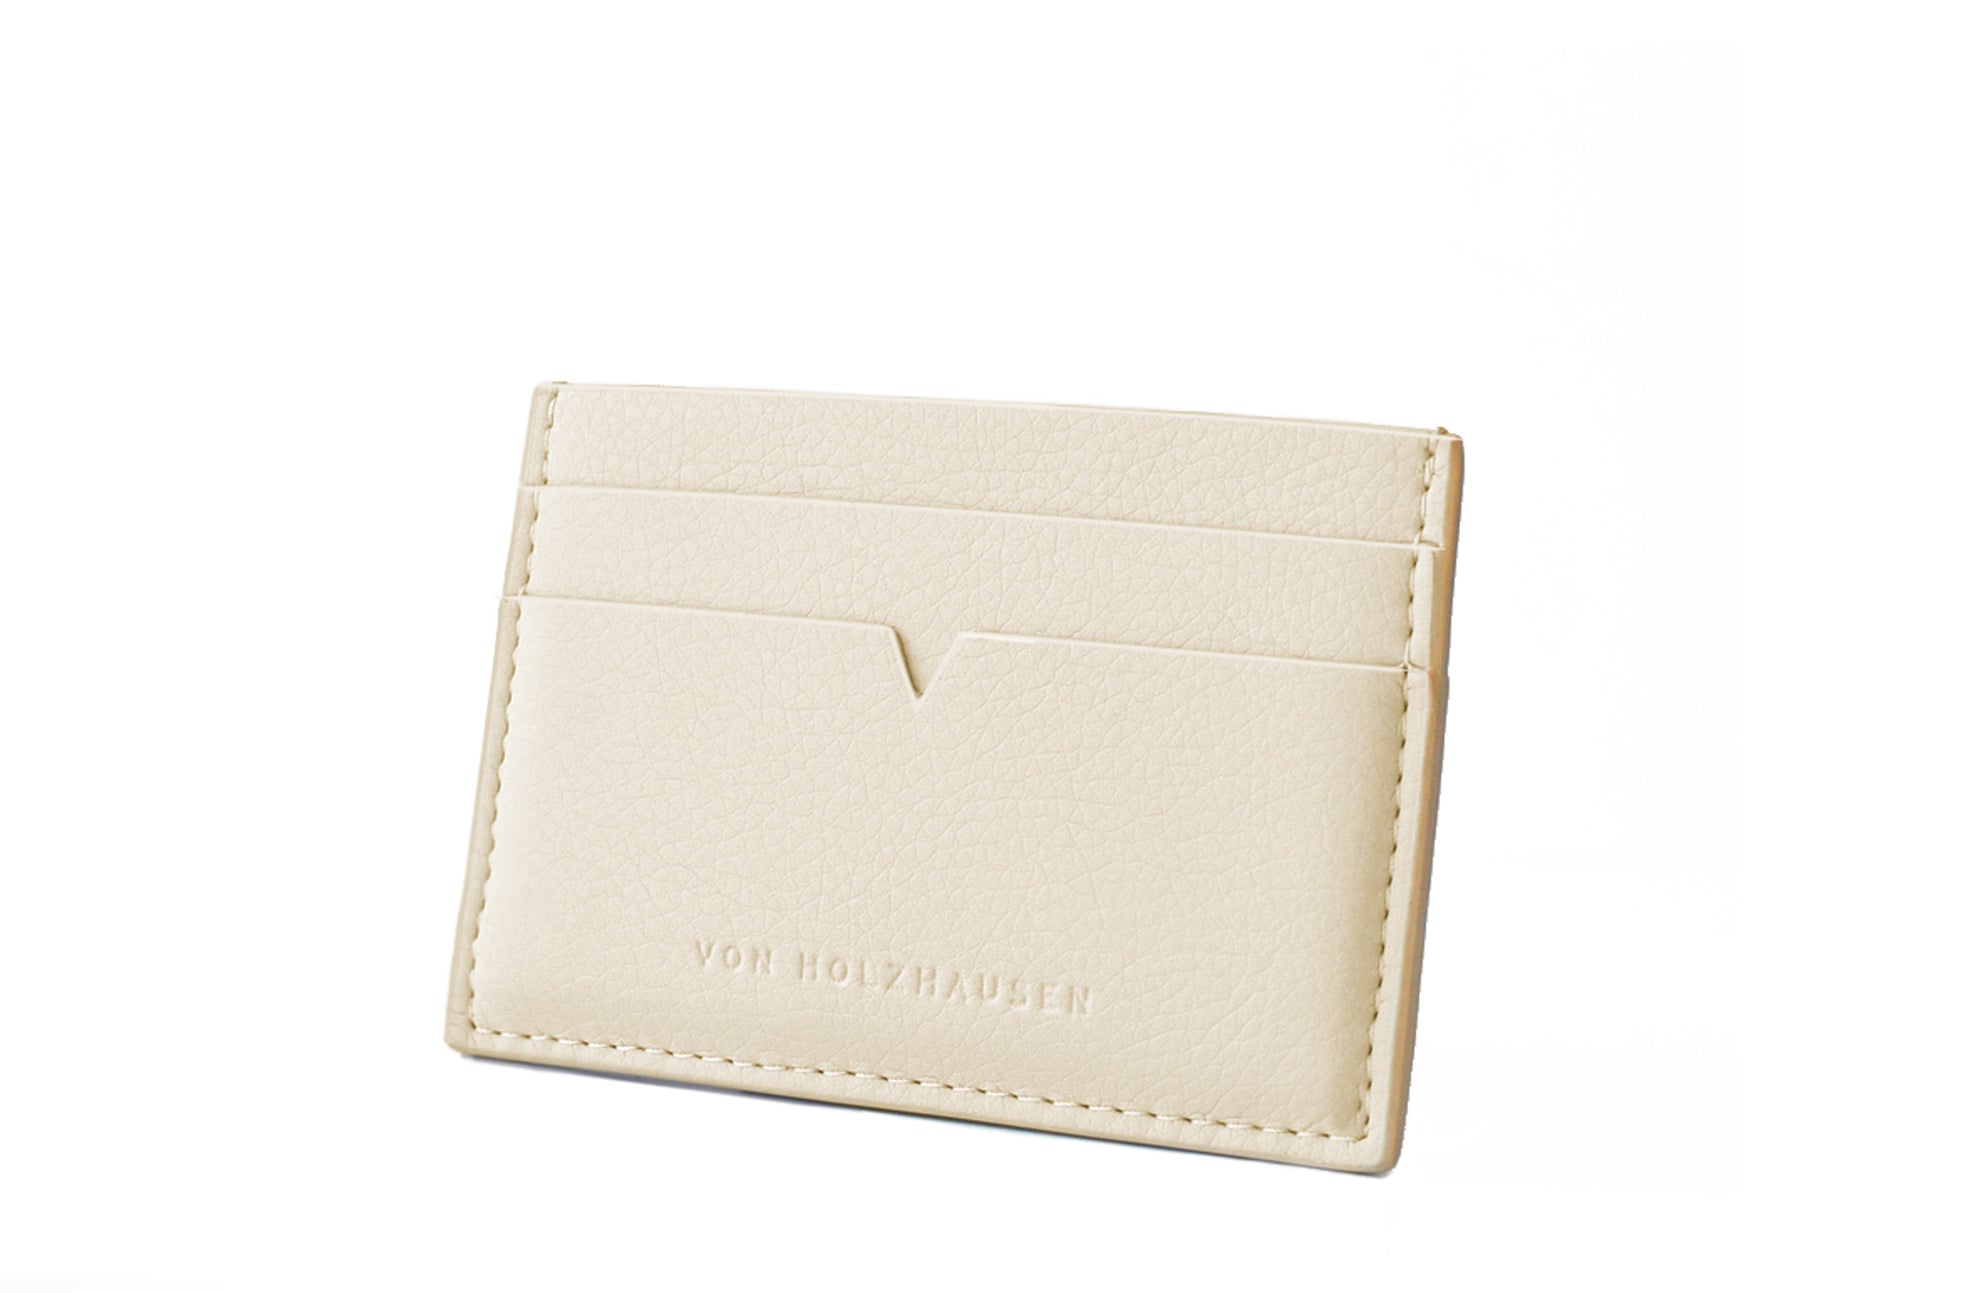 The Credit Card Holder in Technik-Leather in Oat image 3